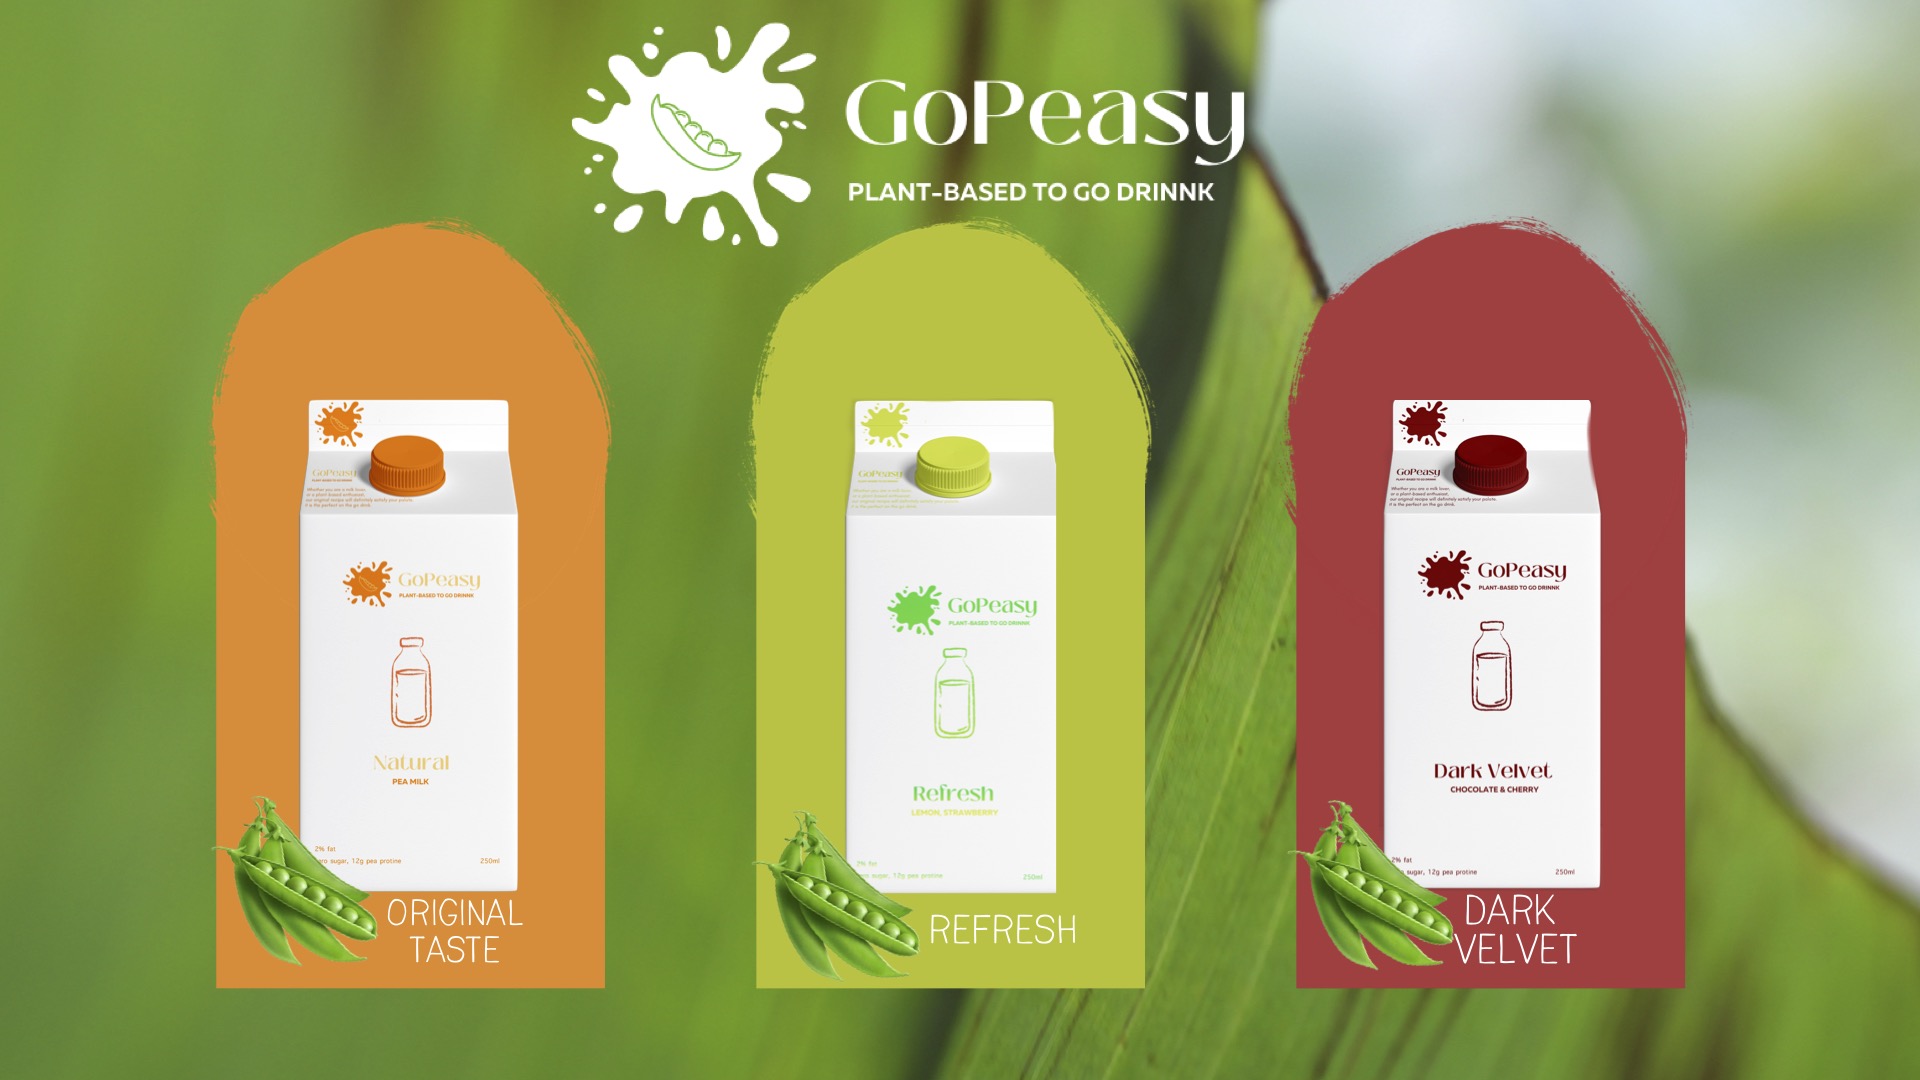 GoPeasy pea milk will come in three flavours; original, lemon-strawberry and chocolate-cherry